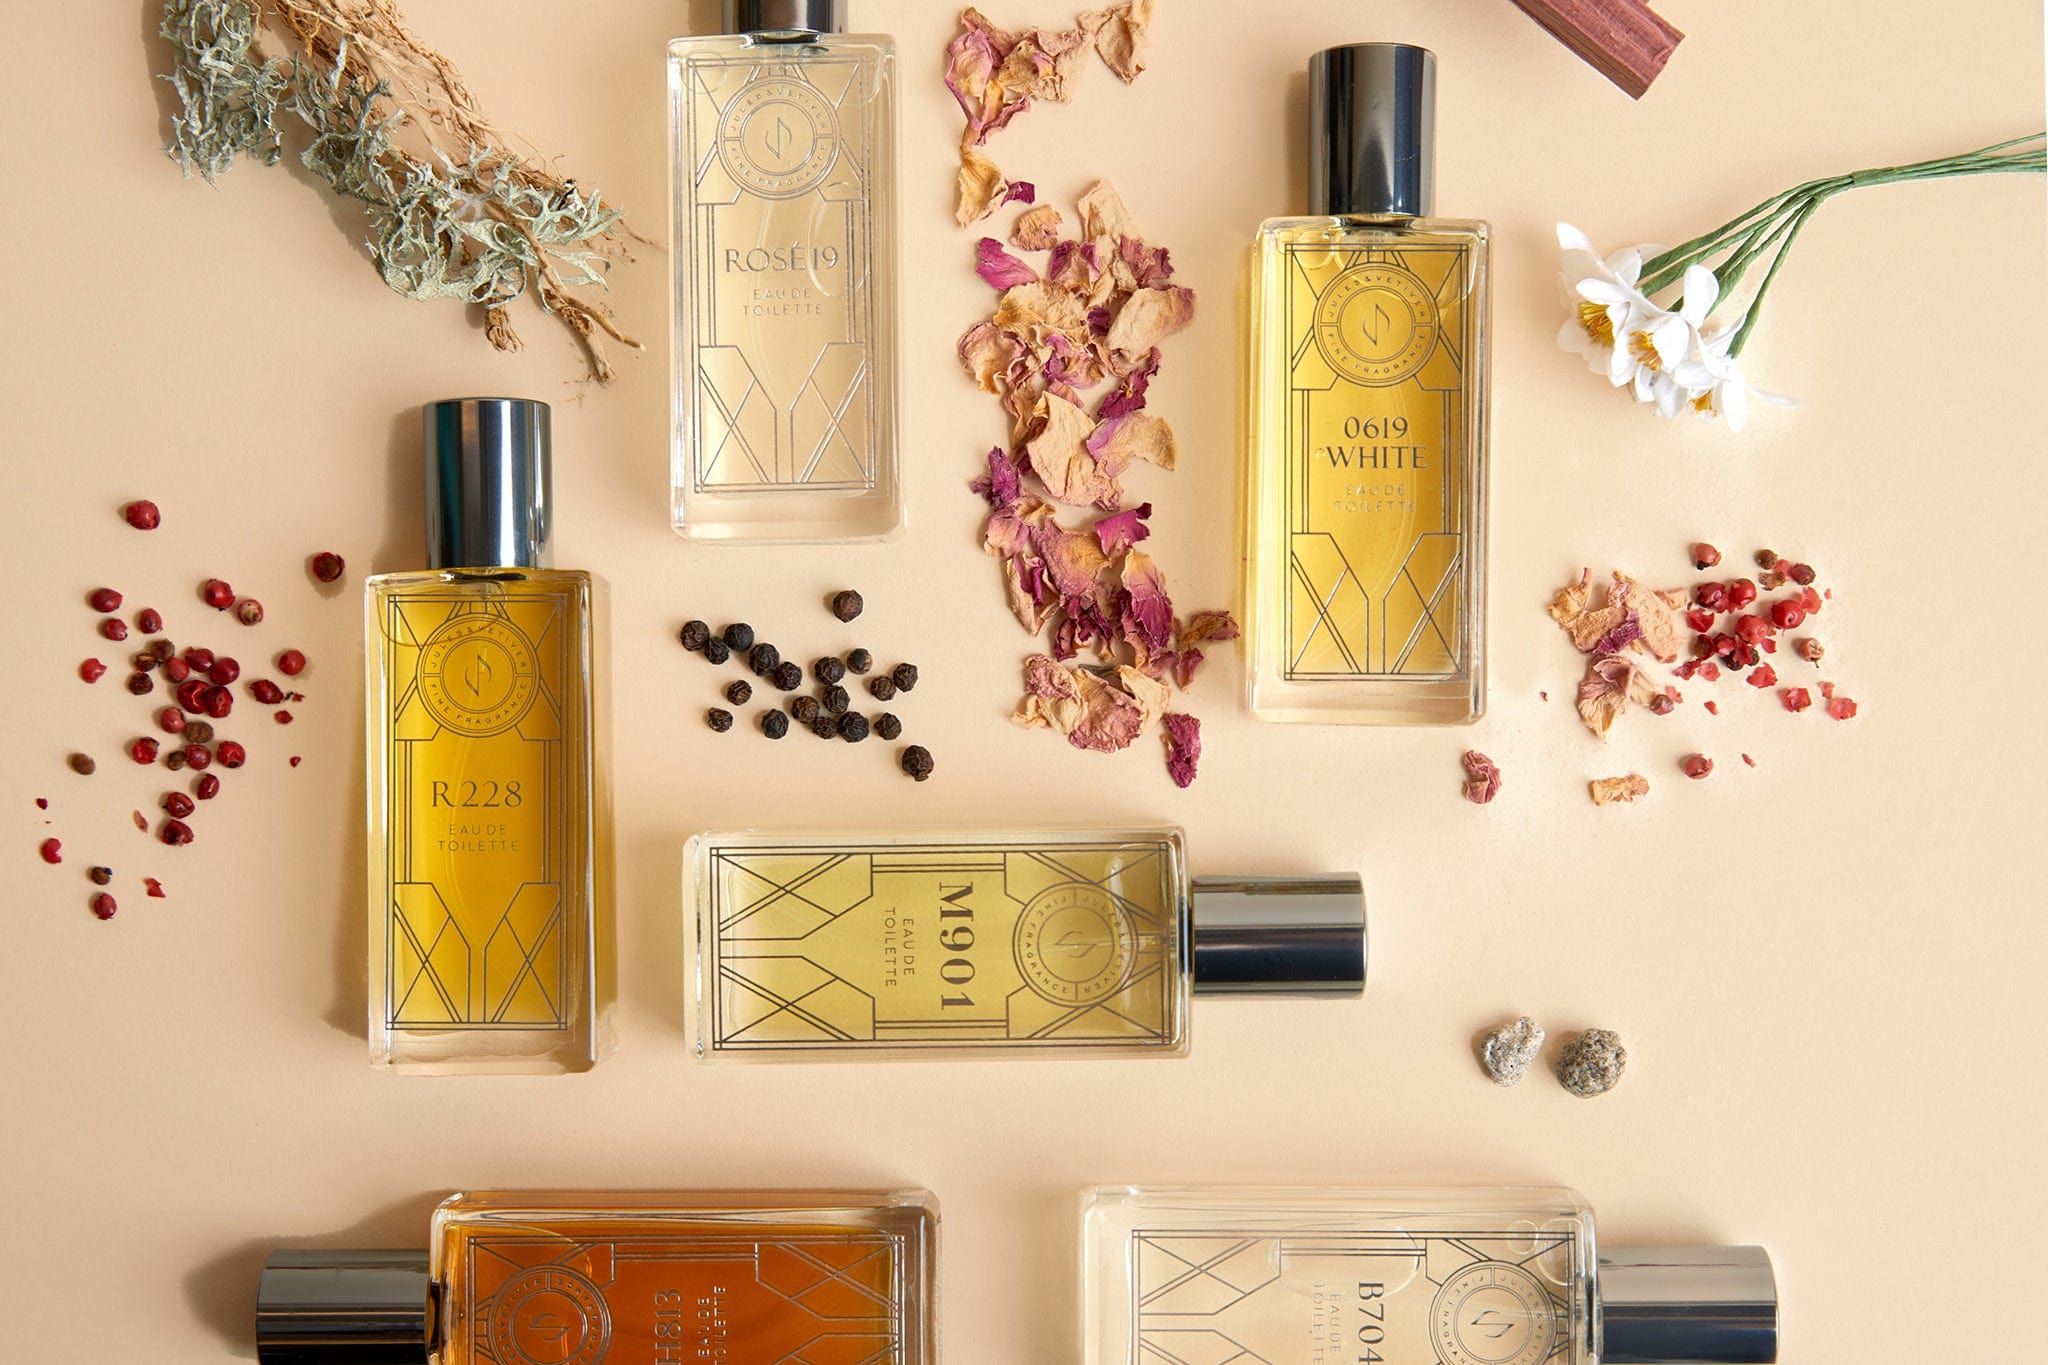 Limited edition fragrance samples